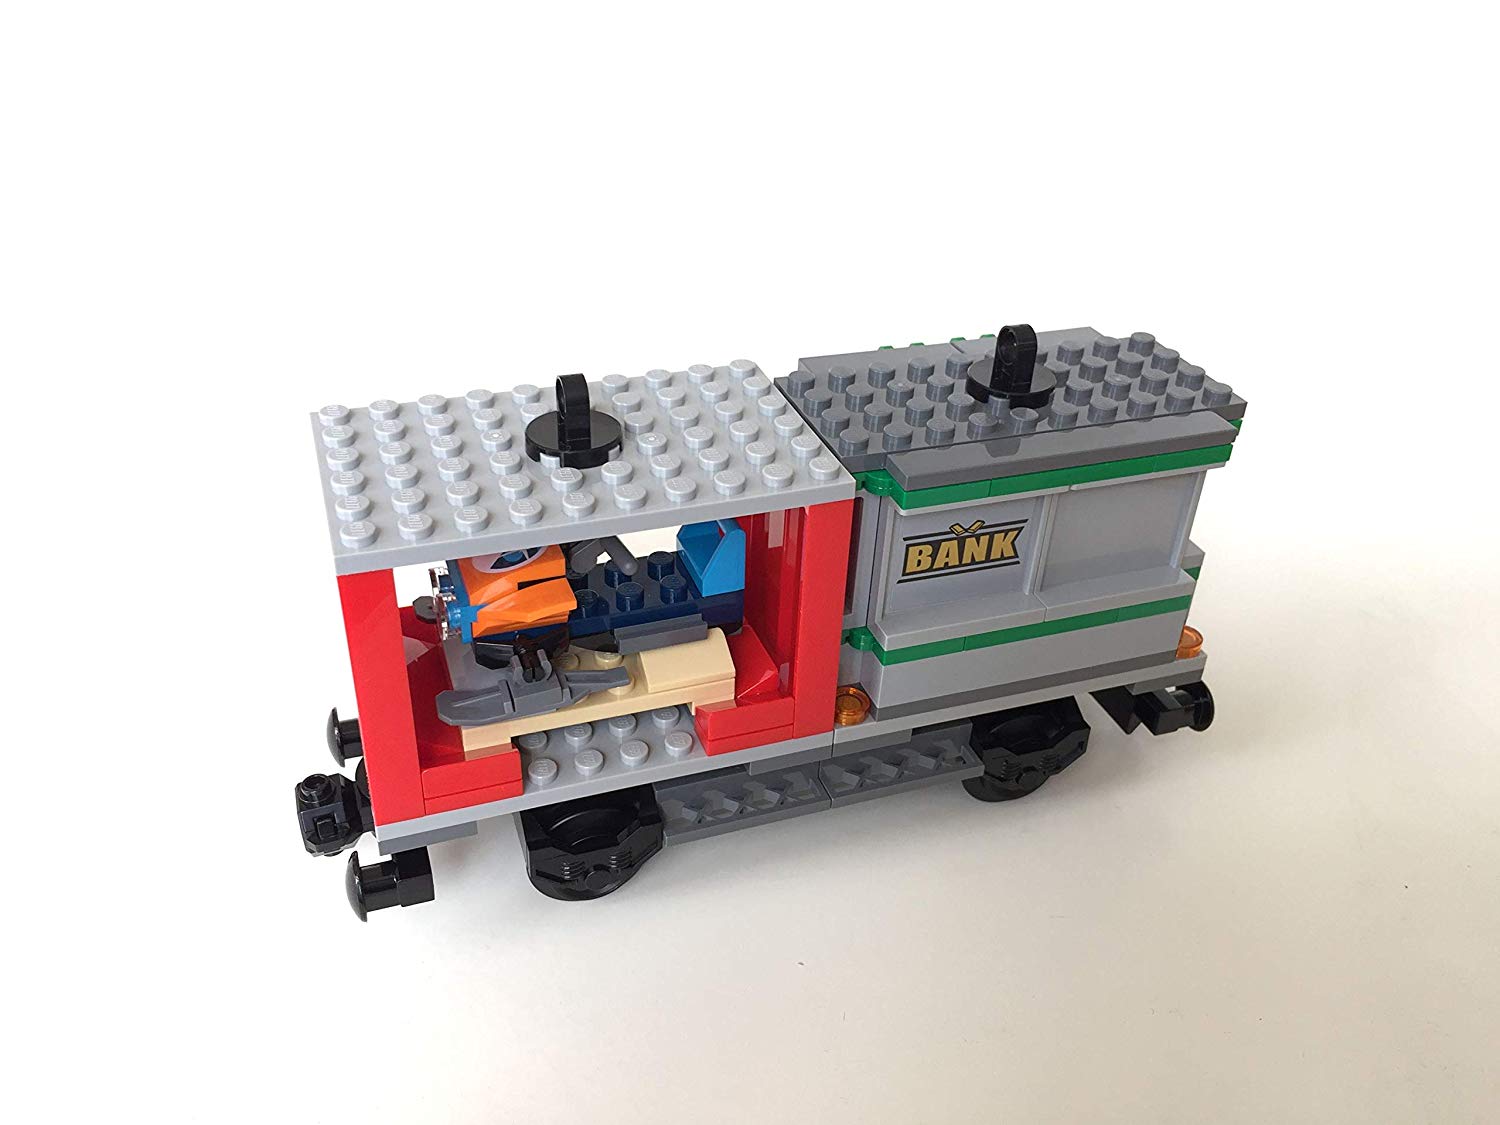 GENUINE Lego City Railway Train with 2 Containers, Container Train 60198)